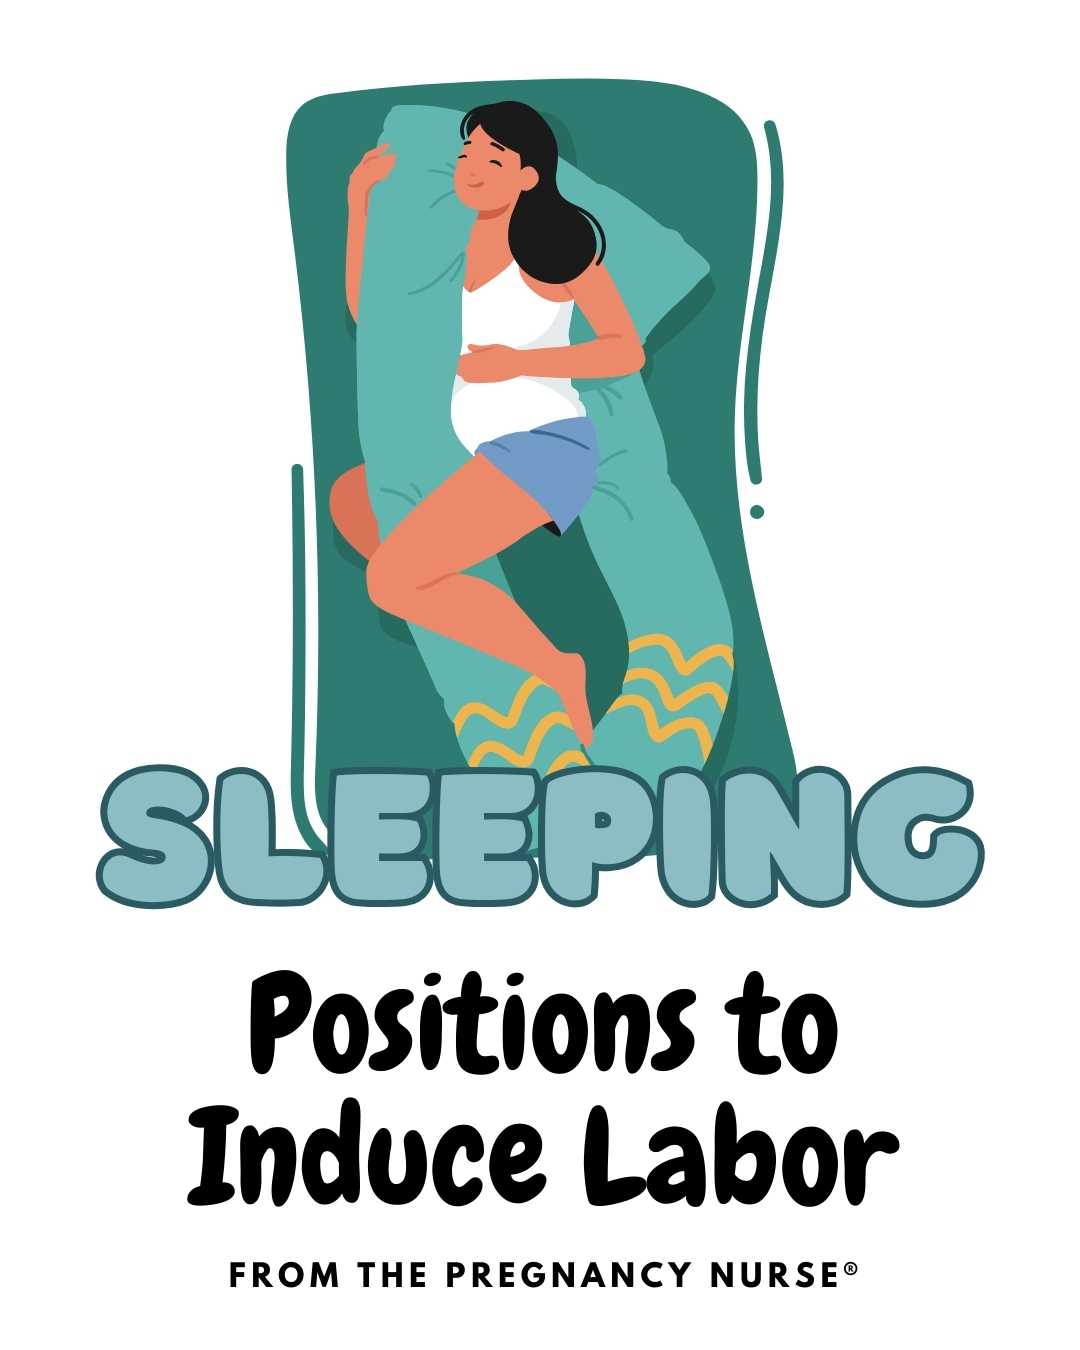 Discover the Sims position for a more comfortable sleep during your third trimester and how it can encourage your baby to turn into a good position for delivery. Get ready to ease into labor!